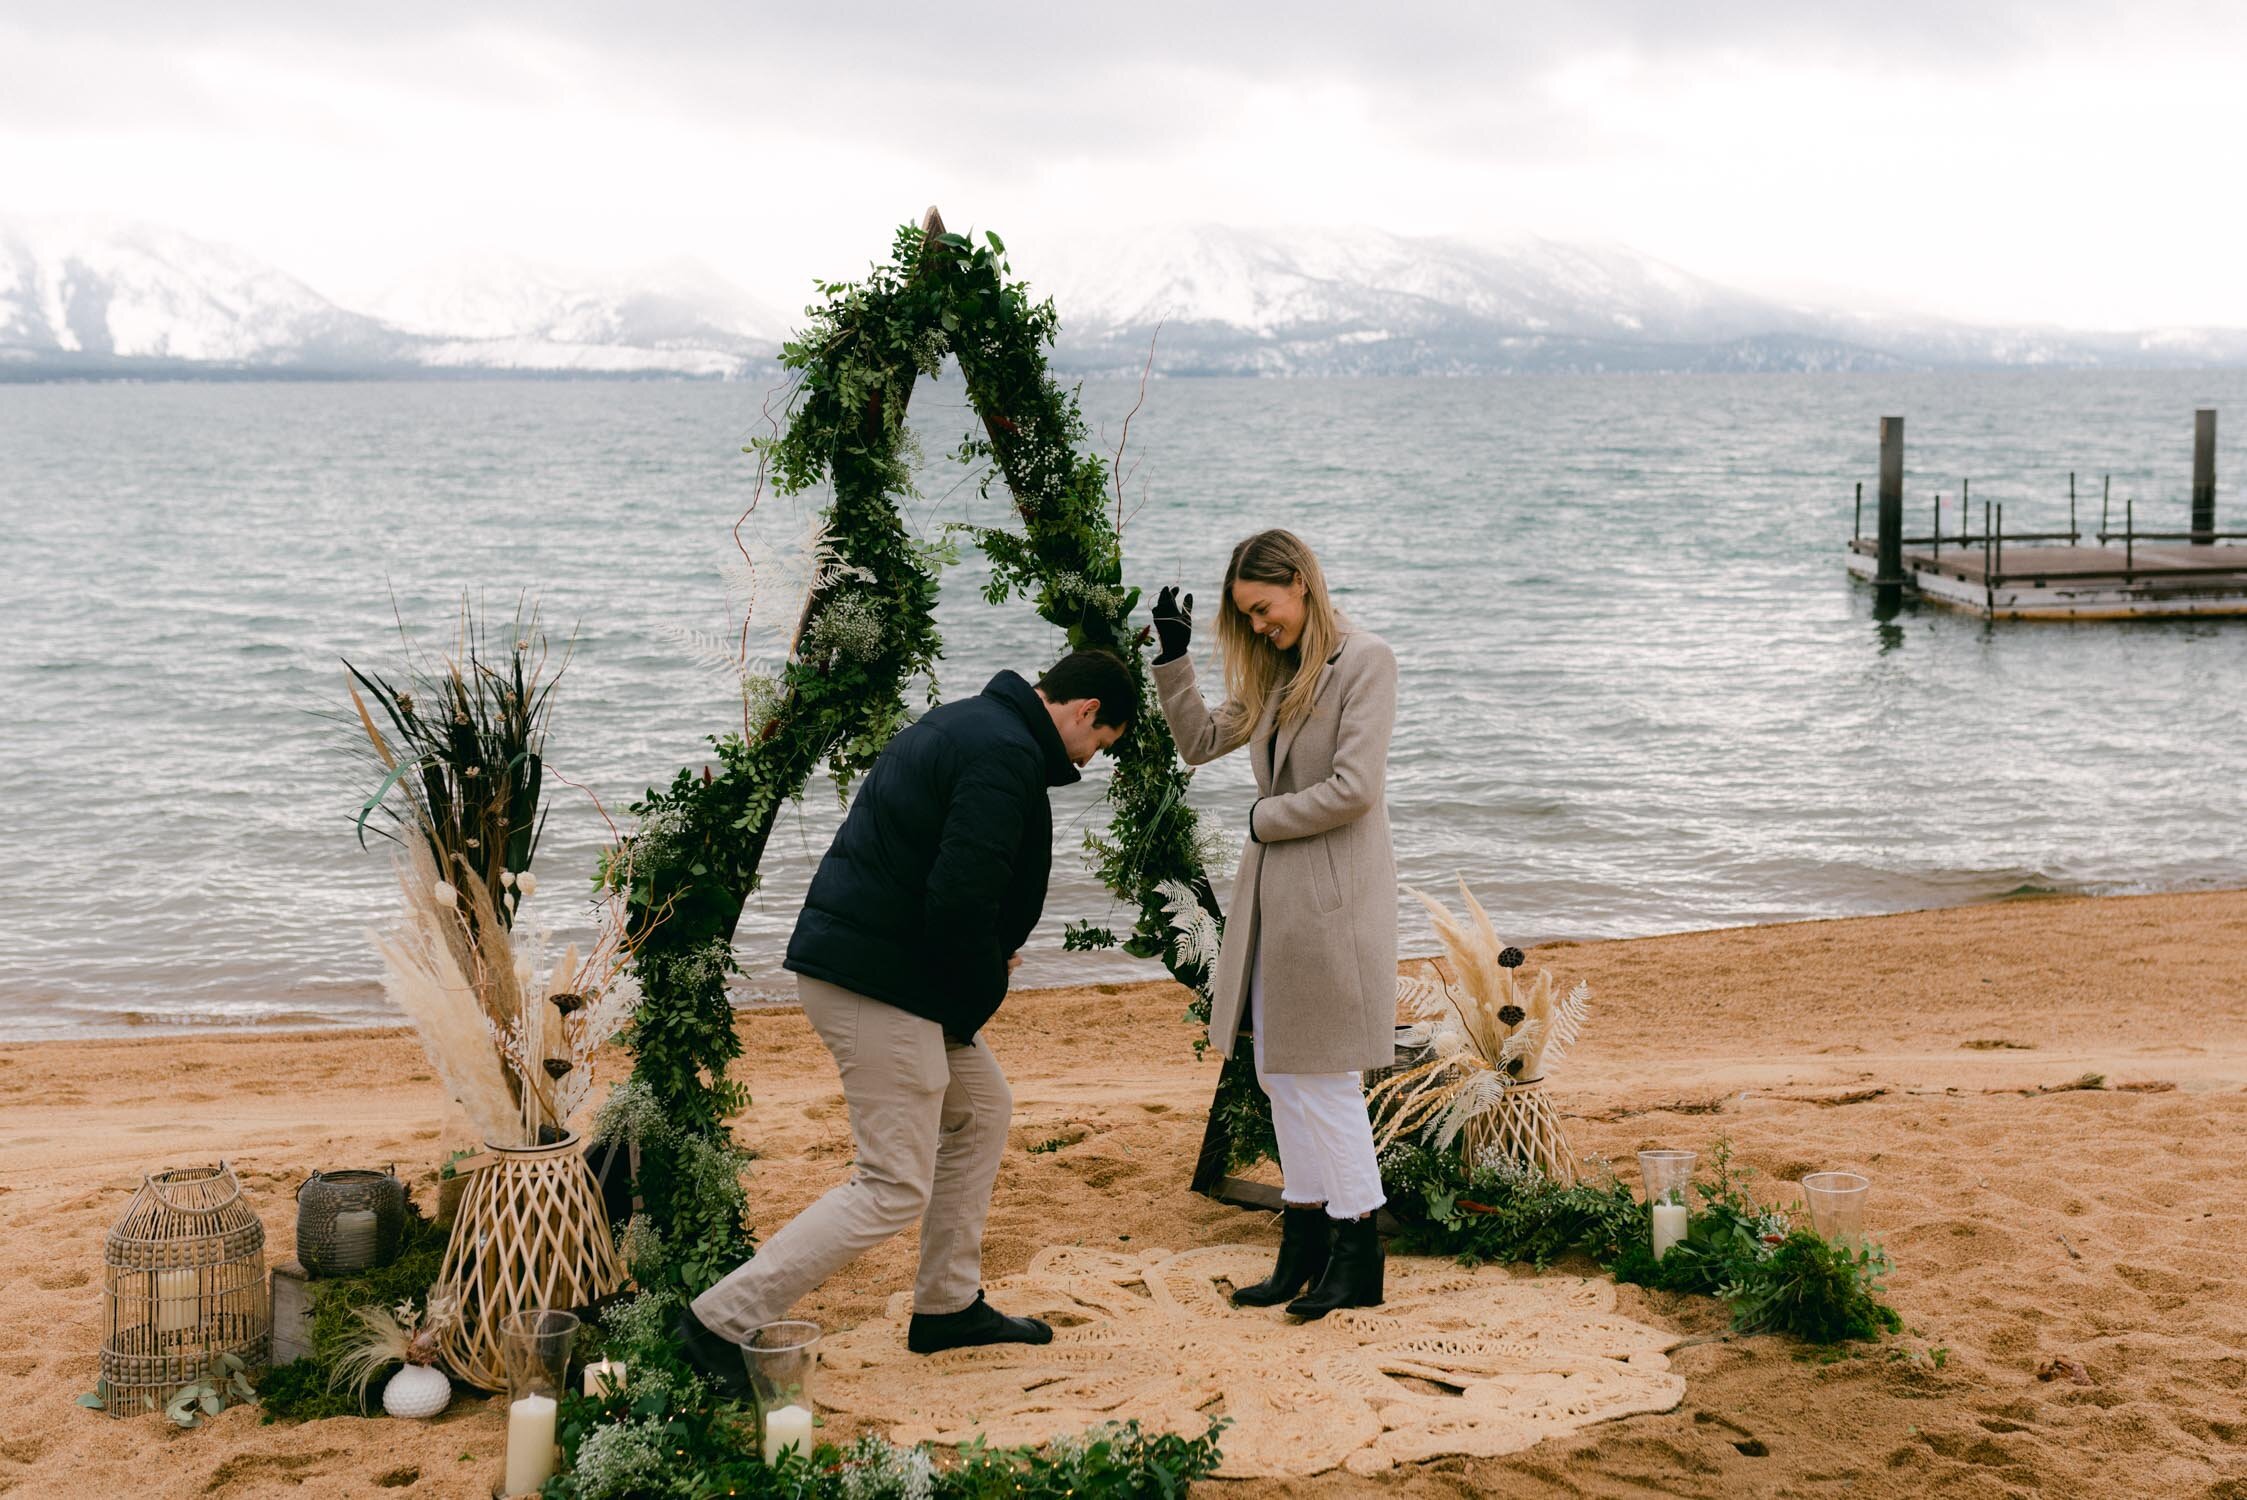 Lake Tahoe Proposal at Edgewood, photo of guy getting down on one knee to propose